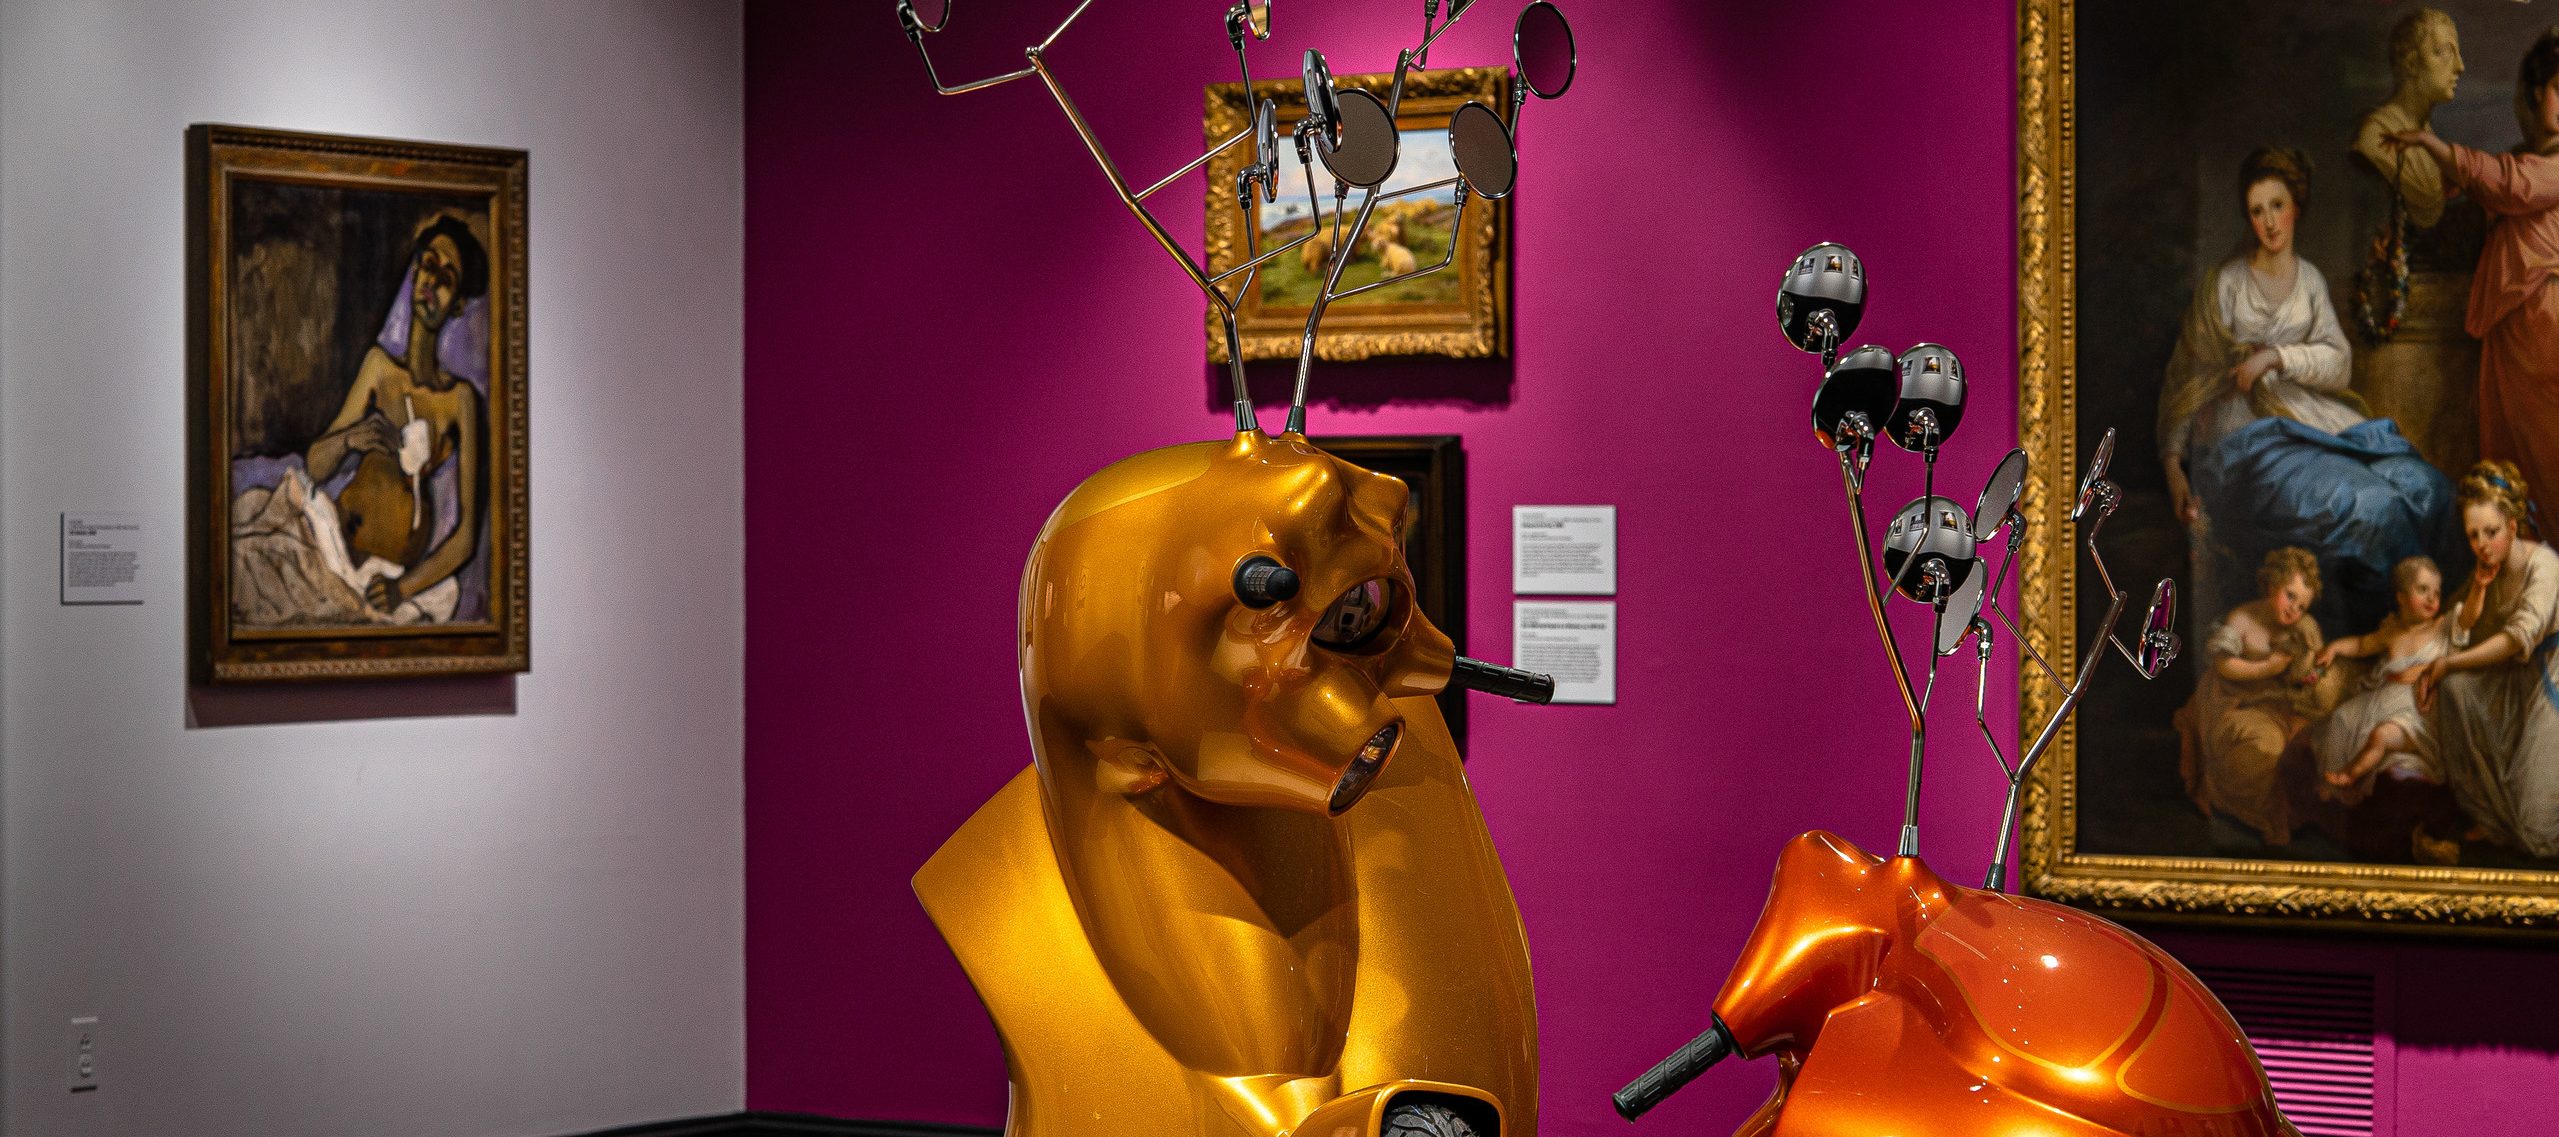 Gallery view with contemporary sculpture made of motorscooters that resemble two antlered animals fighting in foreground.Three paintings hang on a magenta wall in background. To the left on a white wall hangs another painting.